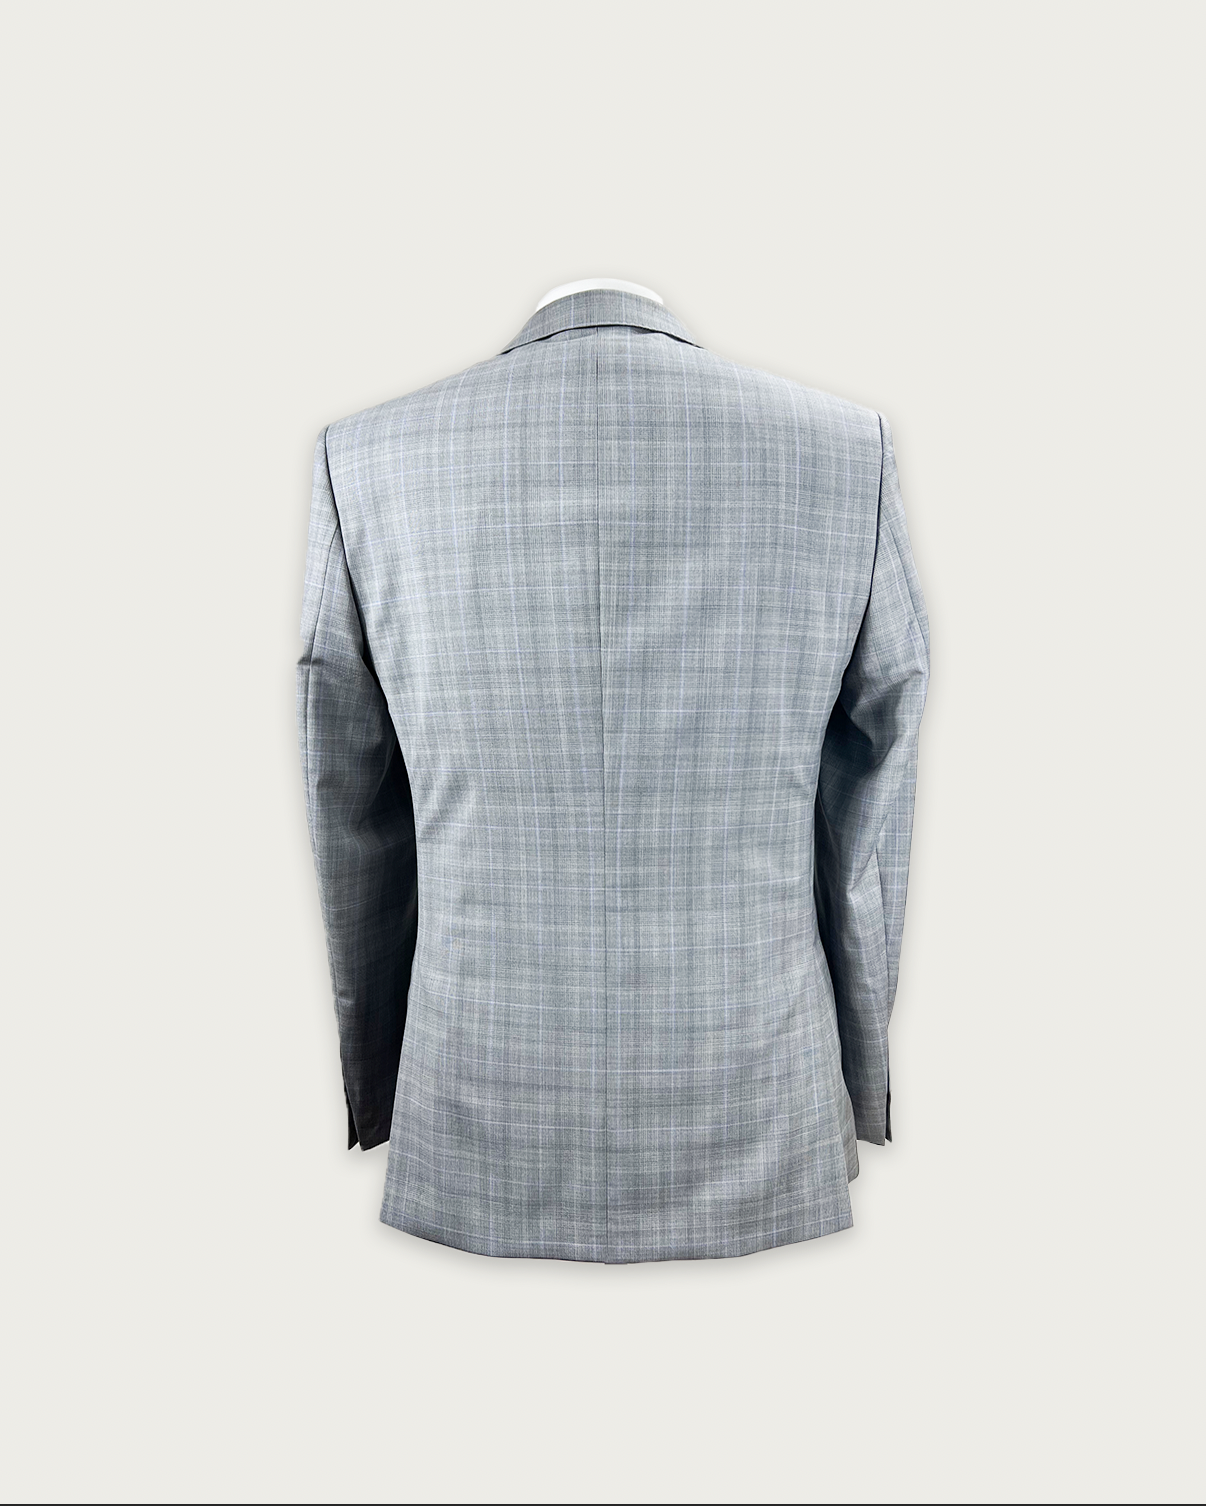 Prince Wales Suit - S100´s Wool